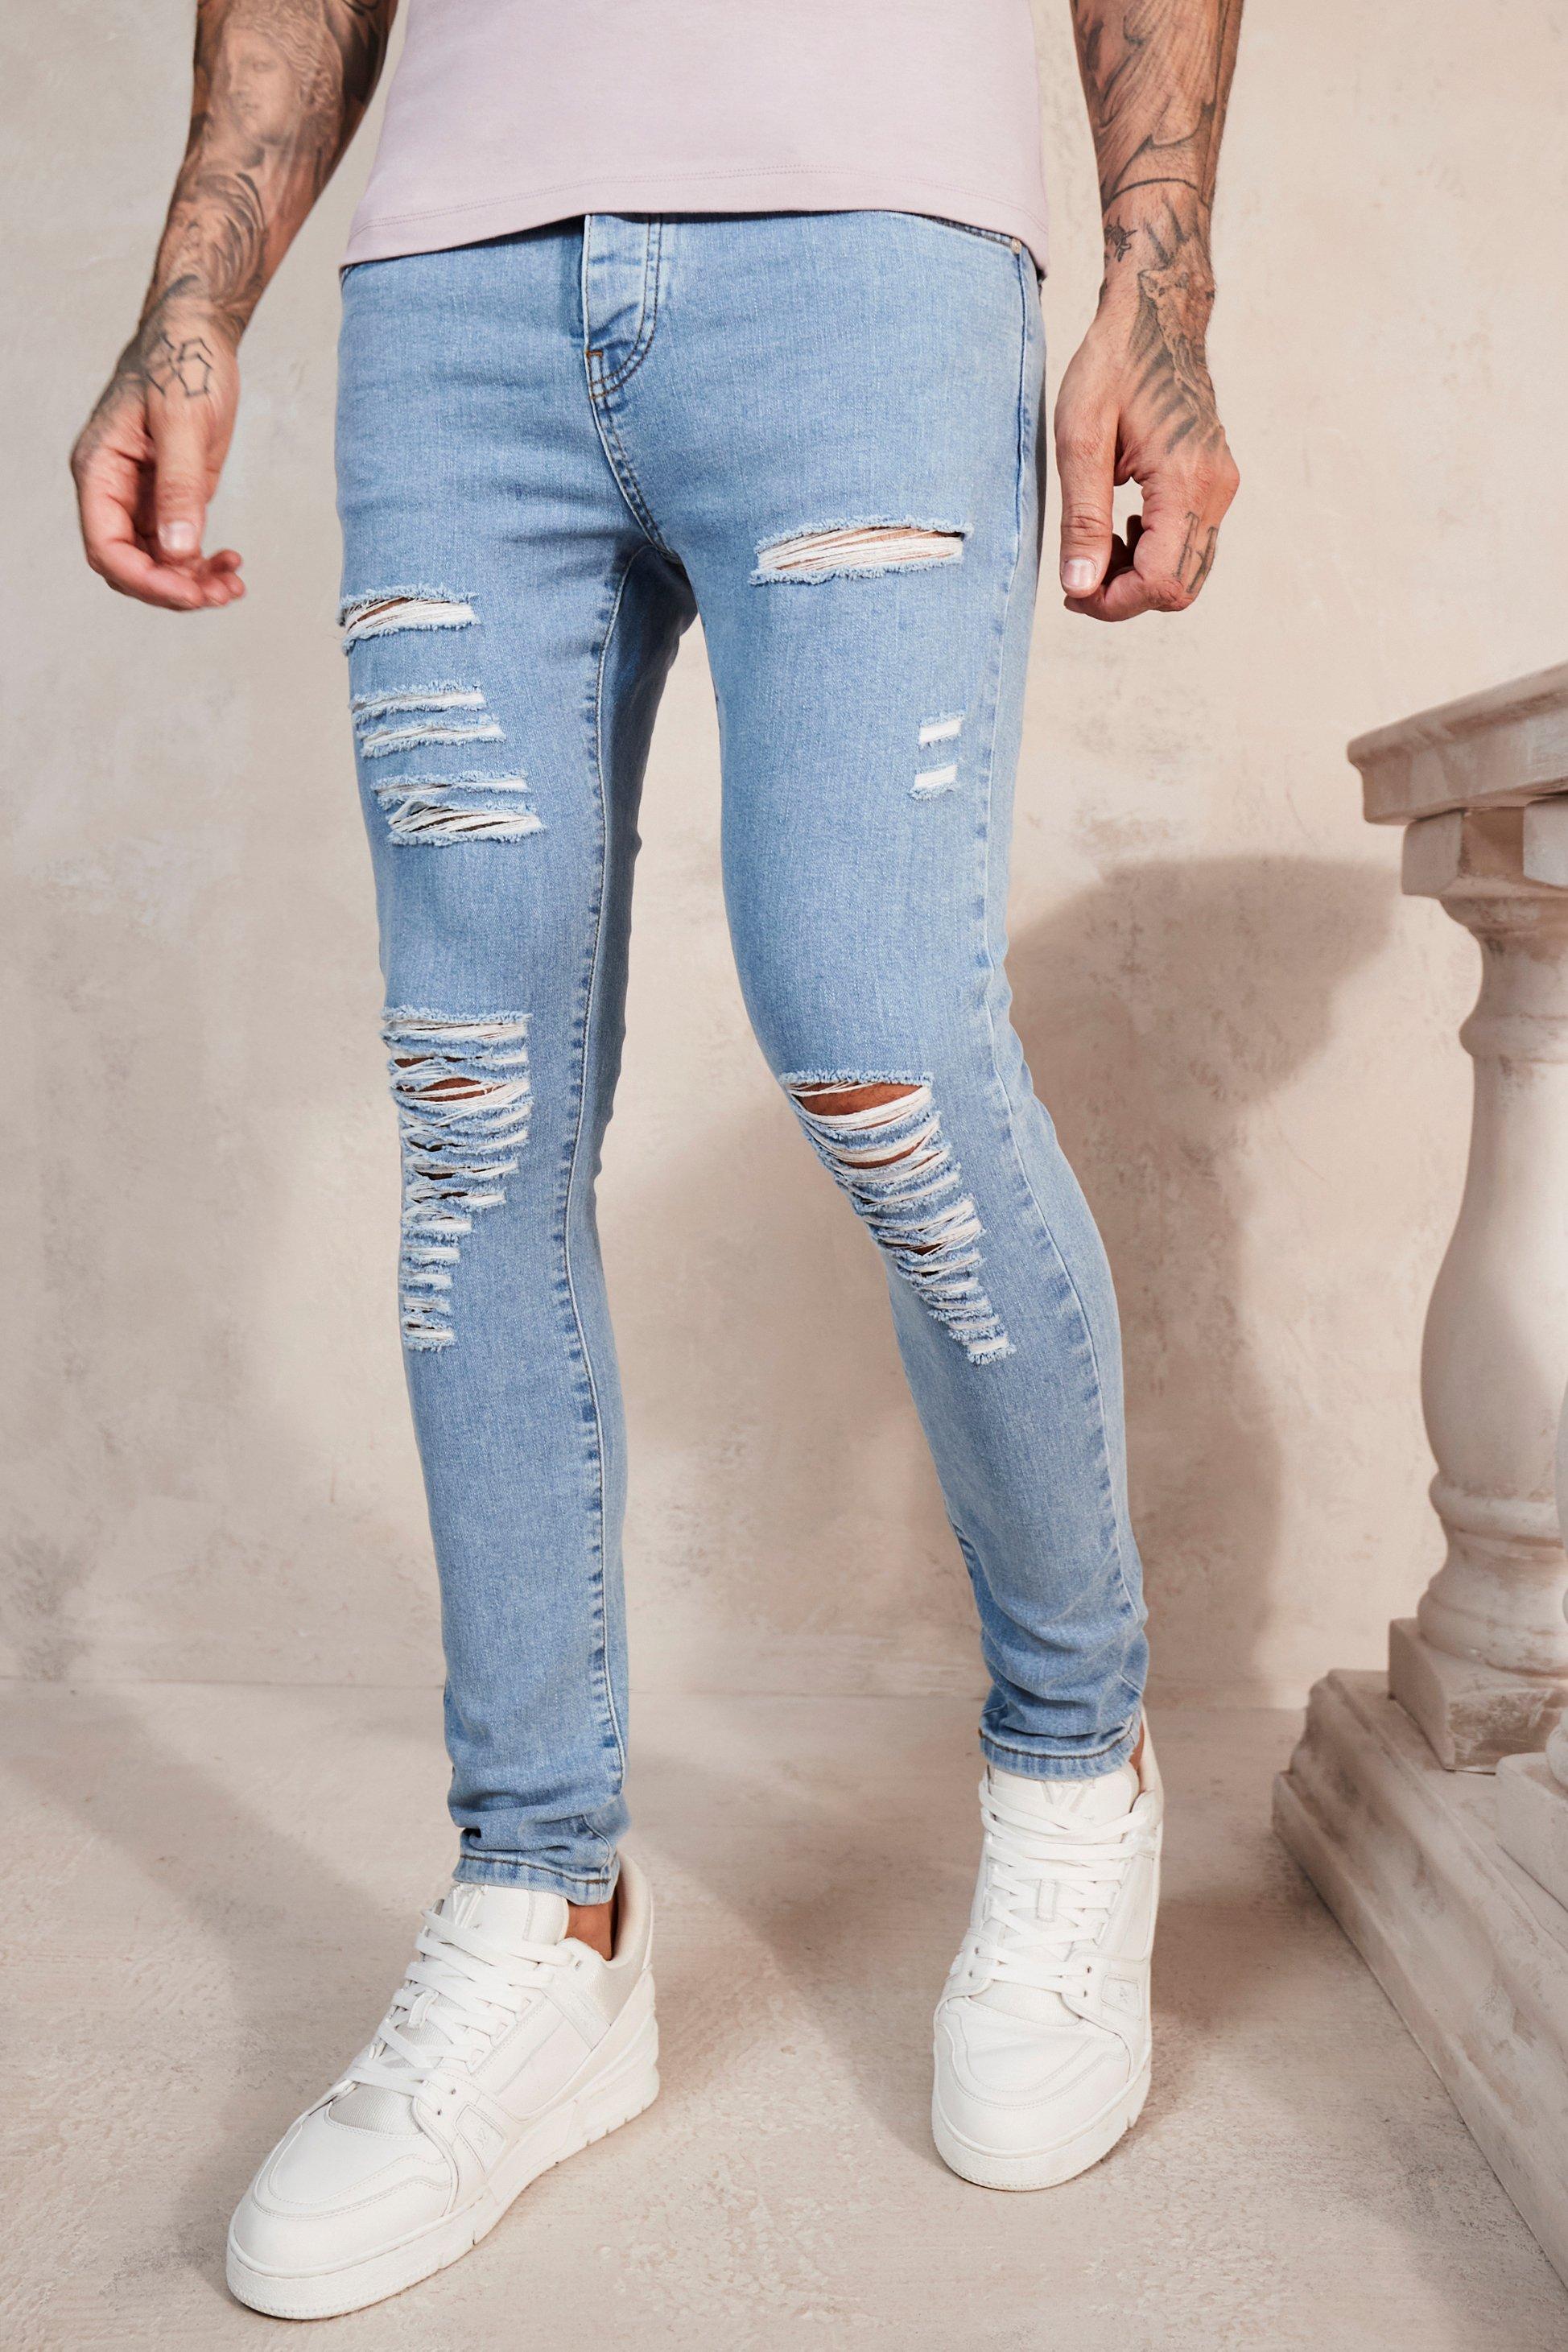 Ice Grey Double Ripped Super Skinny Jeans - Empire Jeans